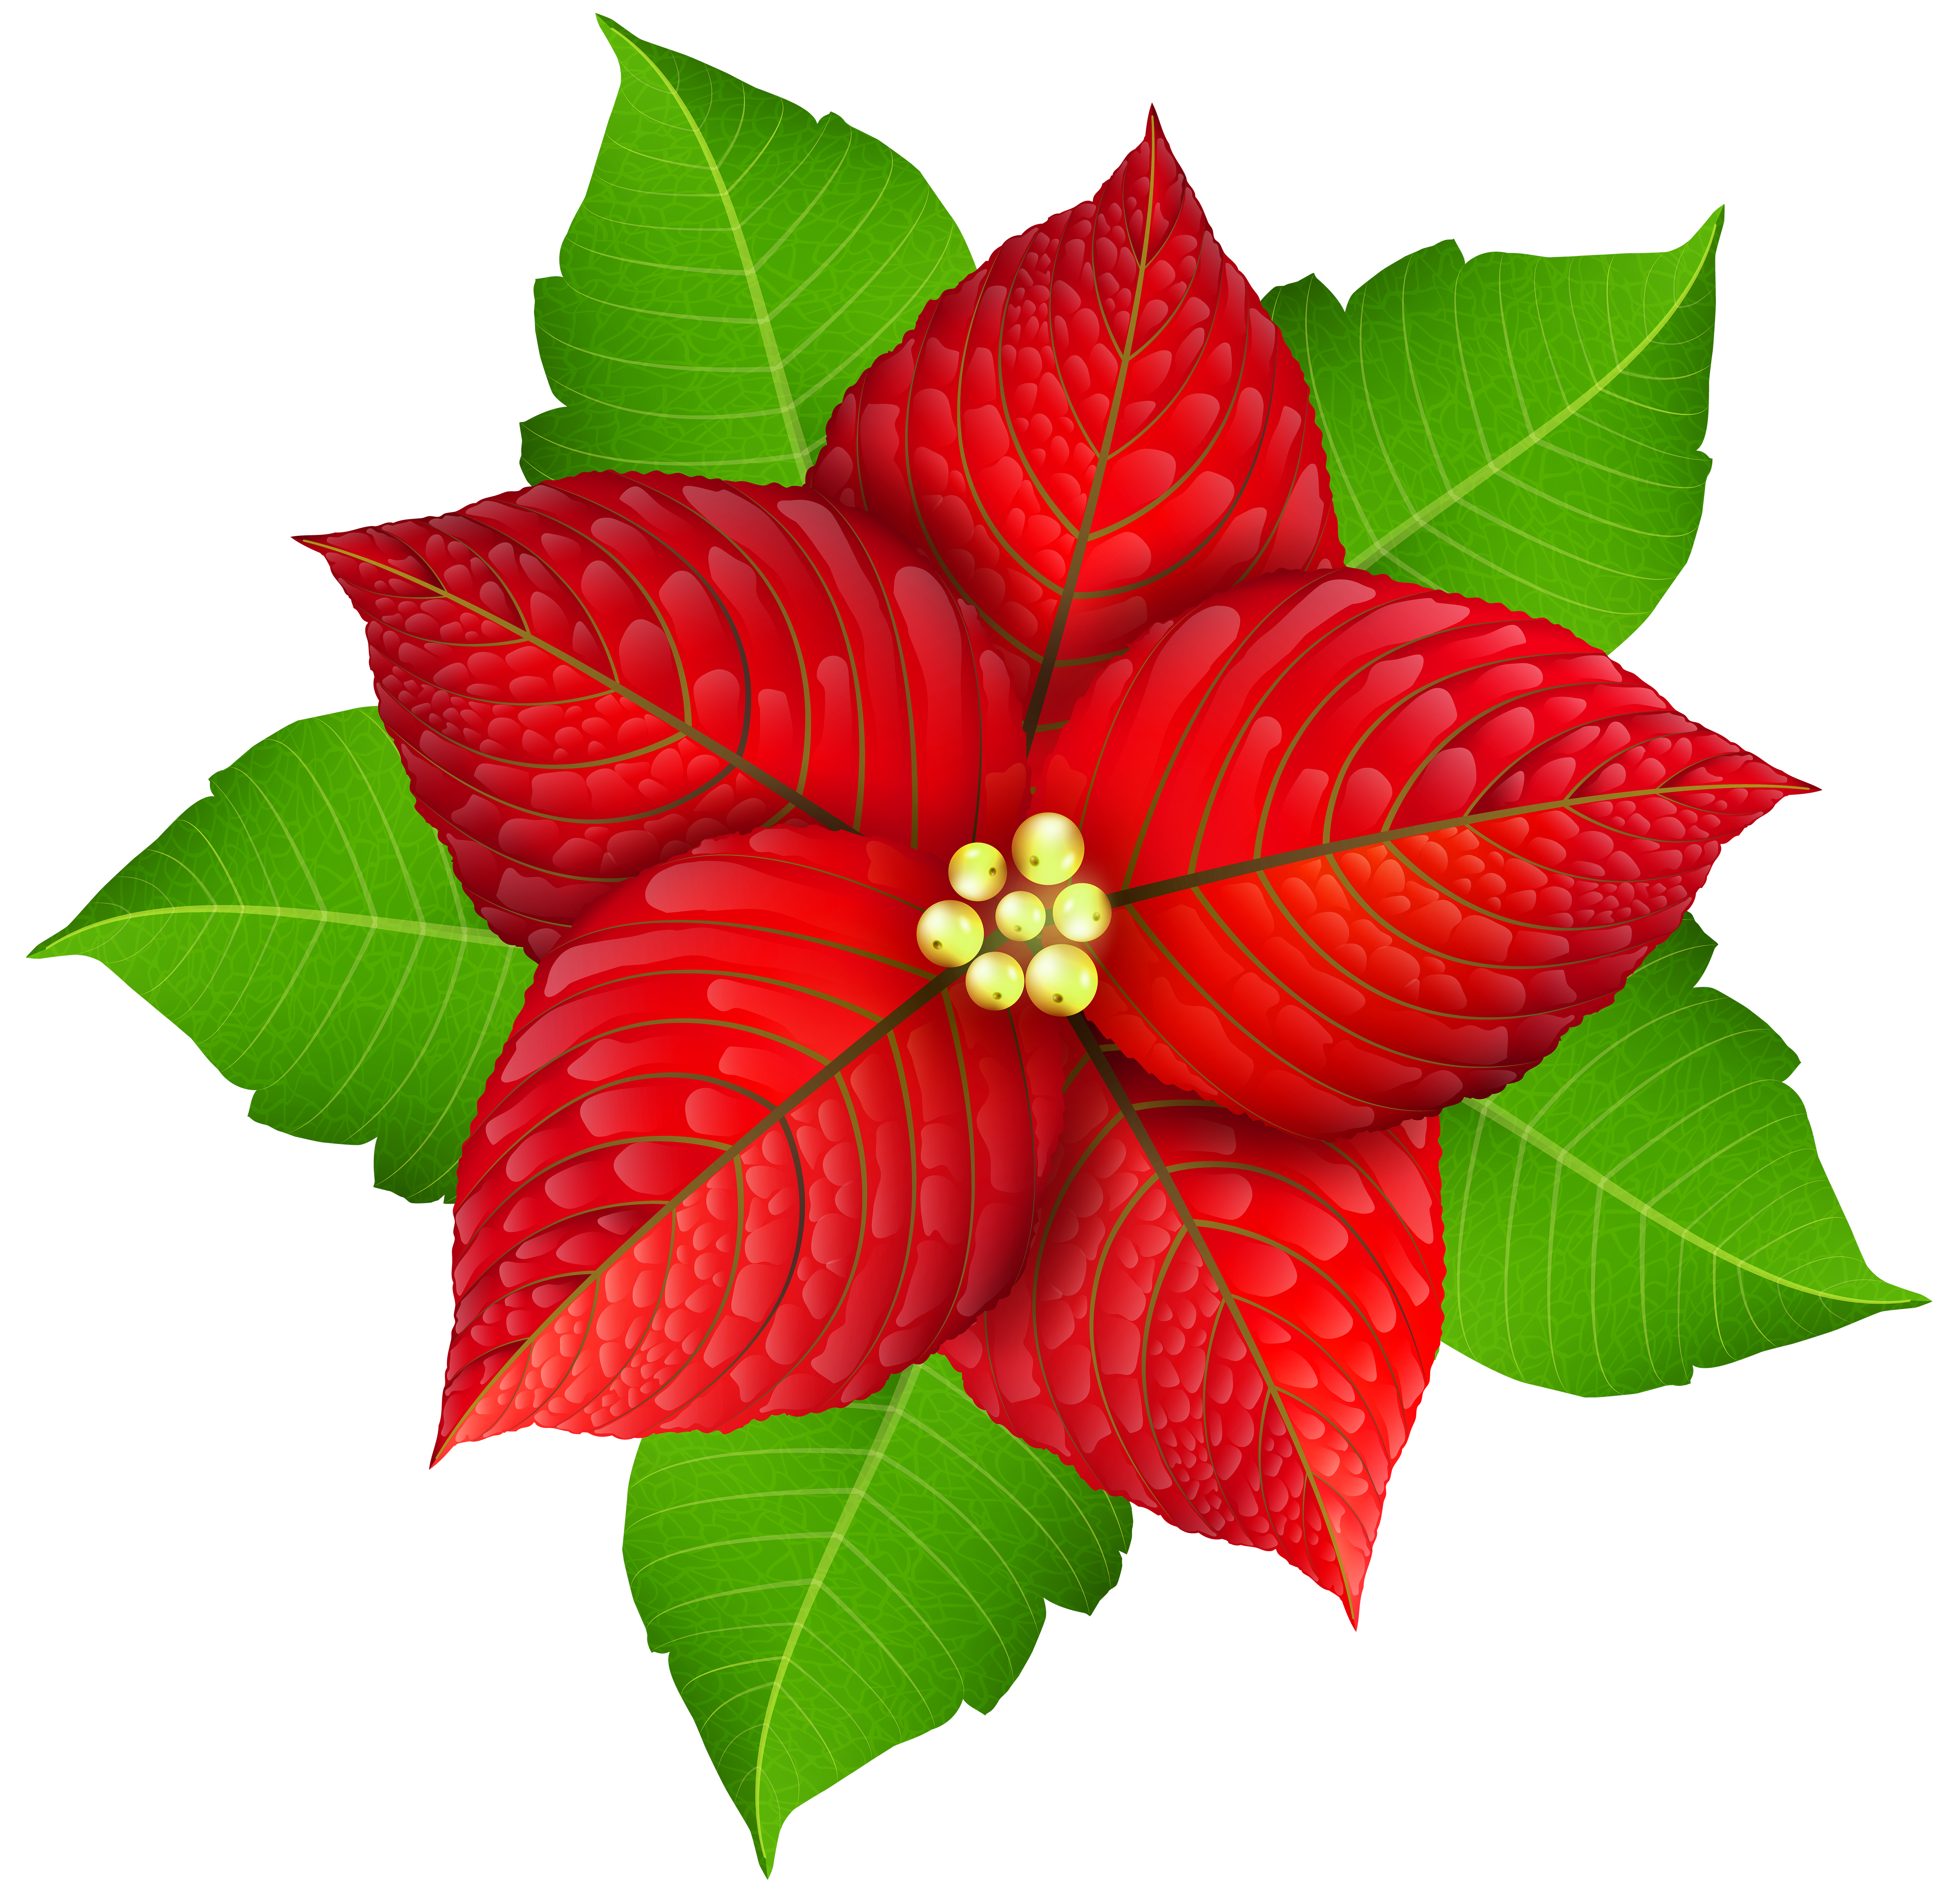 Poinsettia transparent image gallery. Christmas flower png